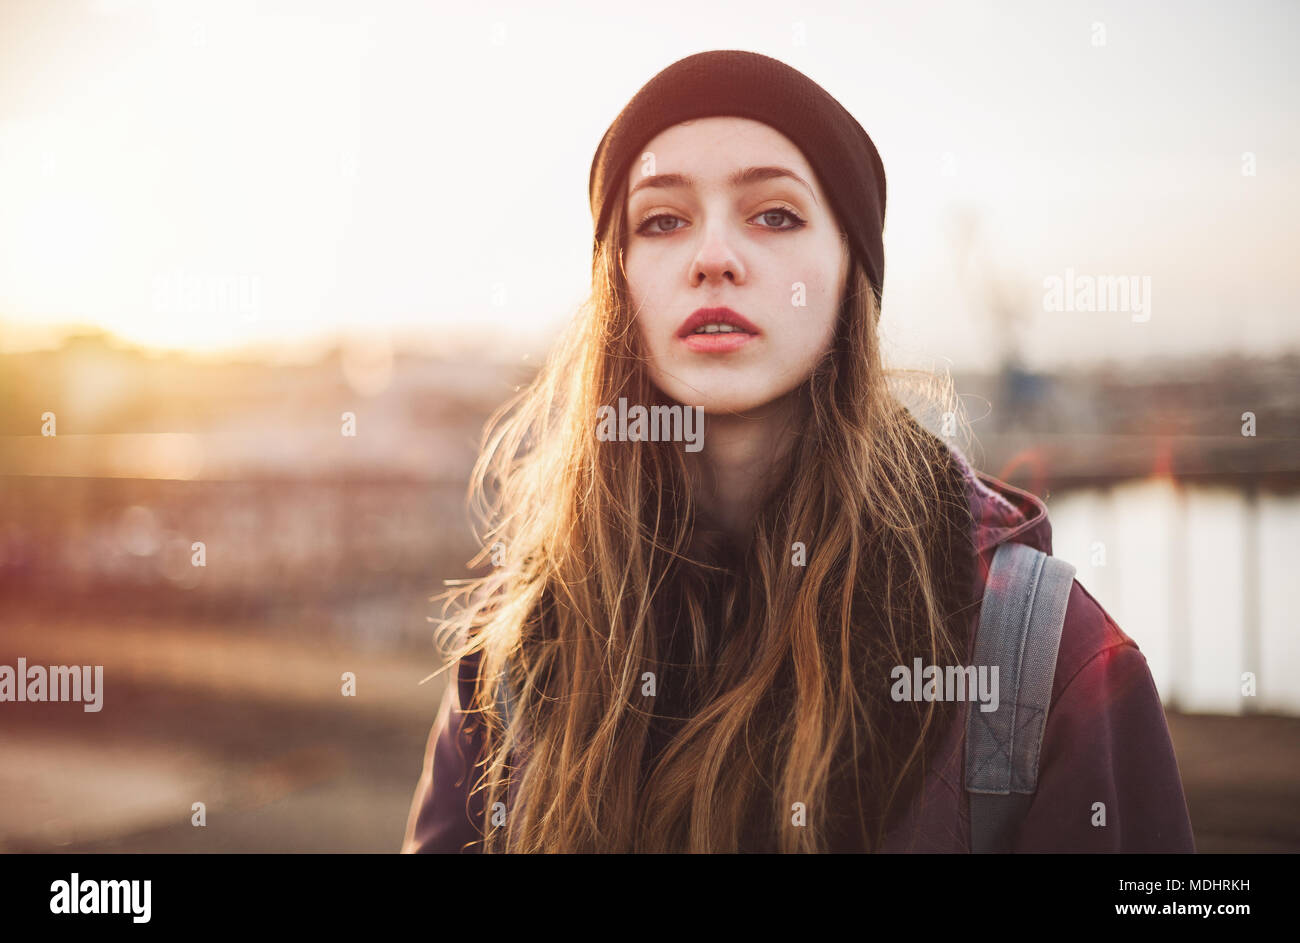 Fashion Aesthetic Portrait Woman Hipster Style Stock Photo 2347932623